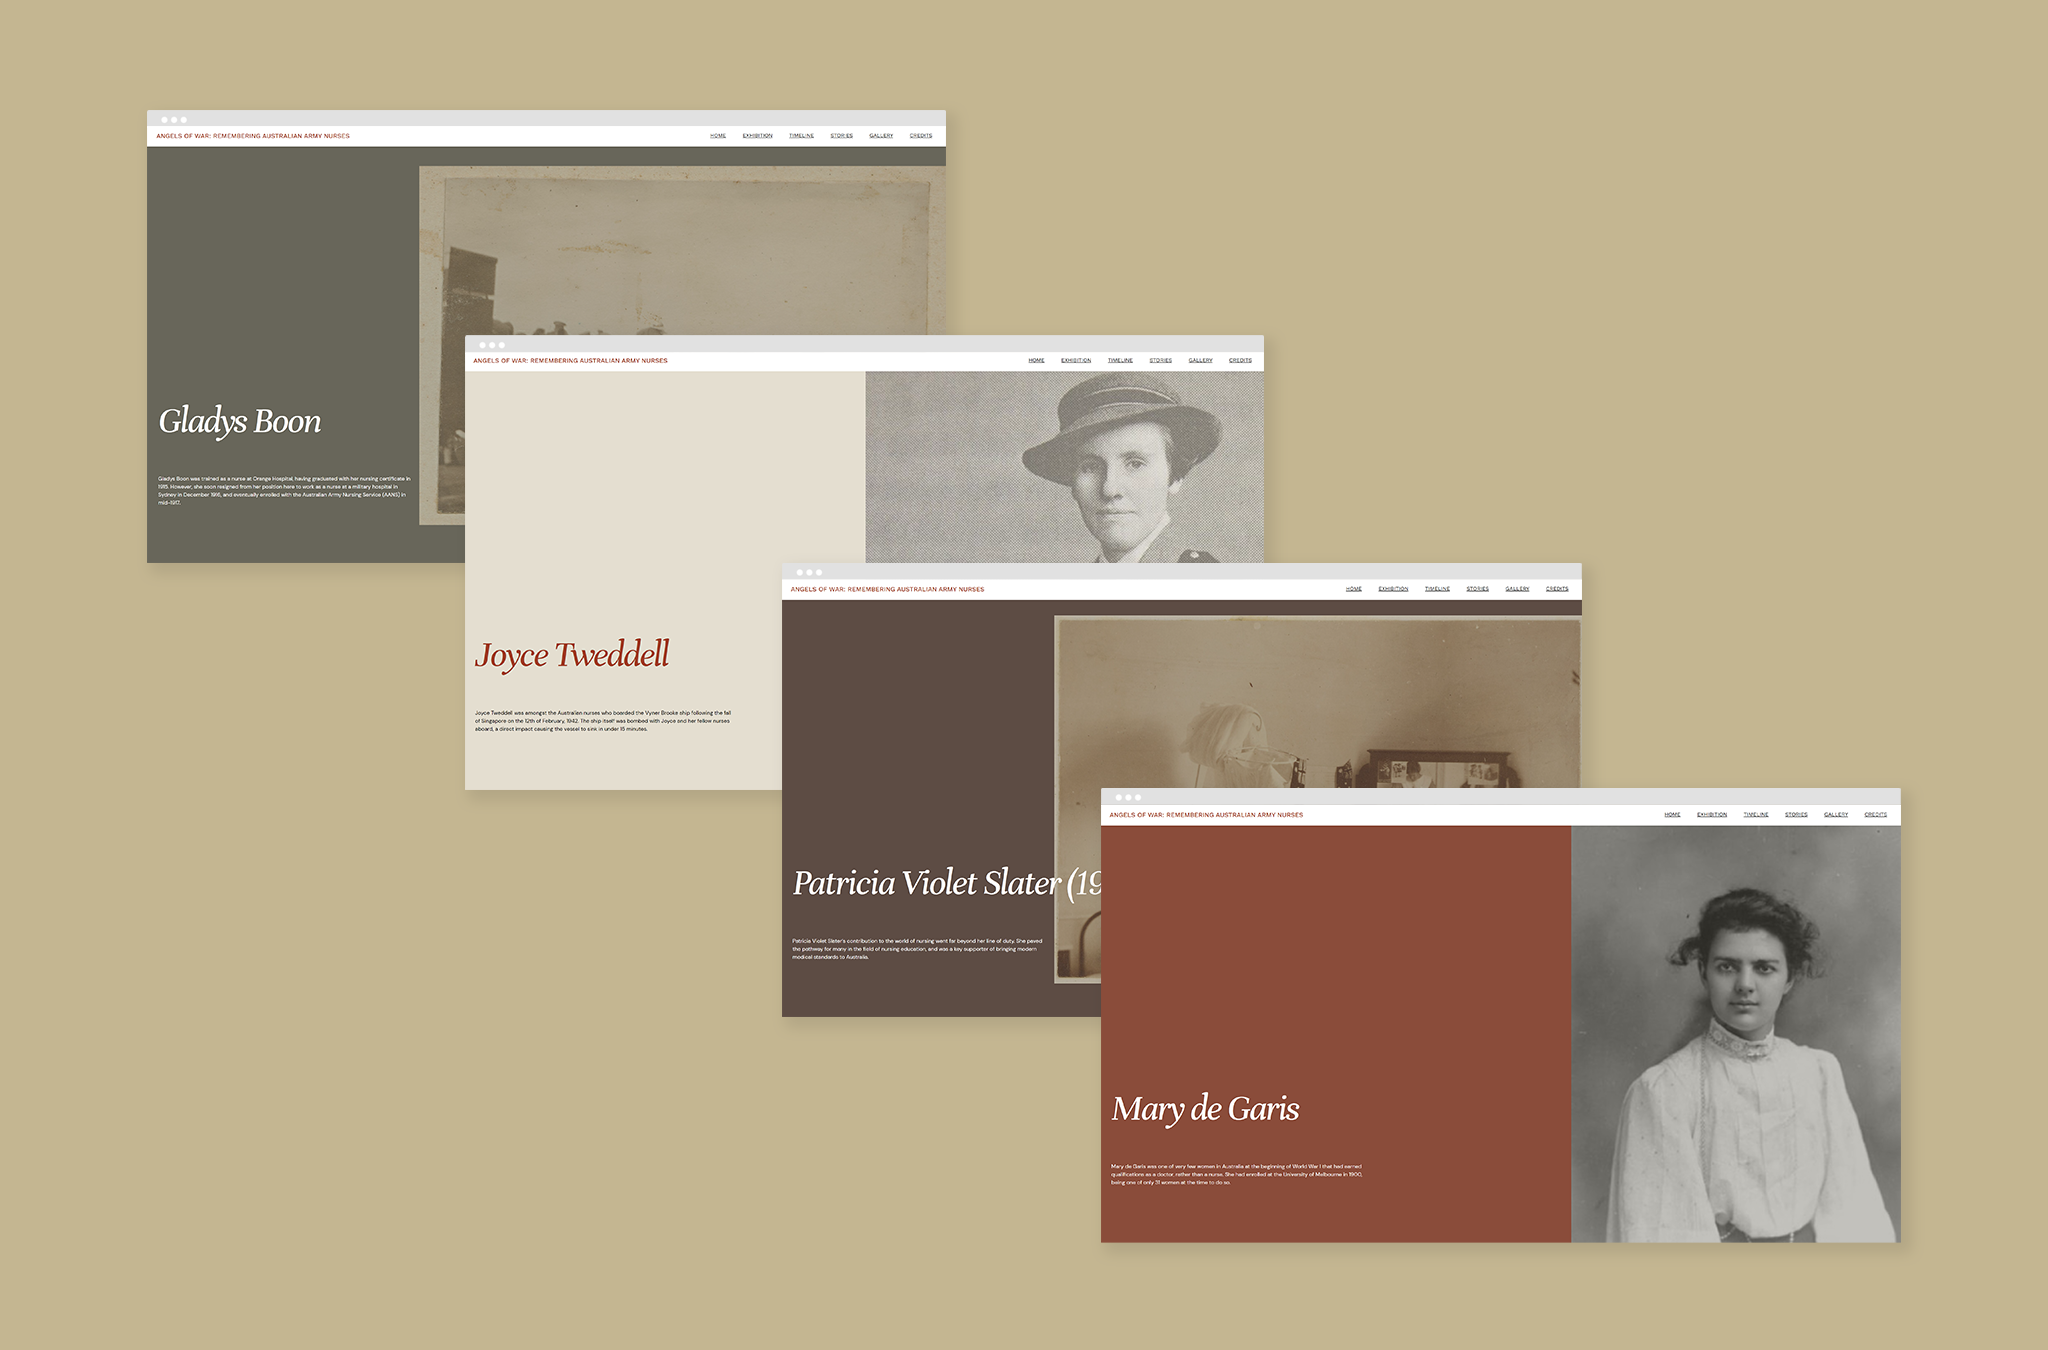 Headers for each page that use a different colour from the overall palette.